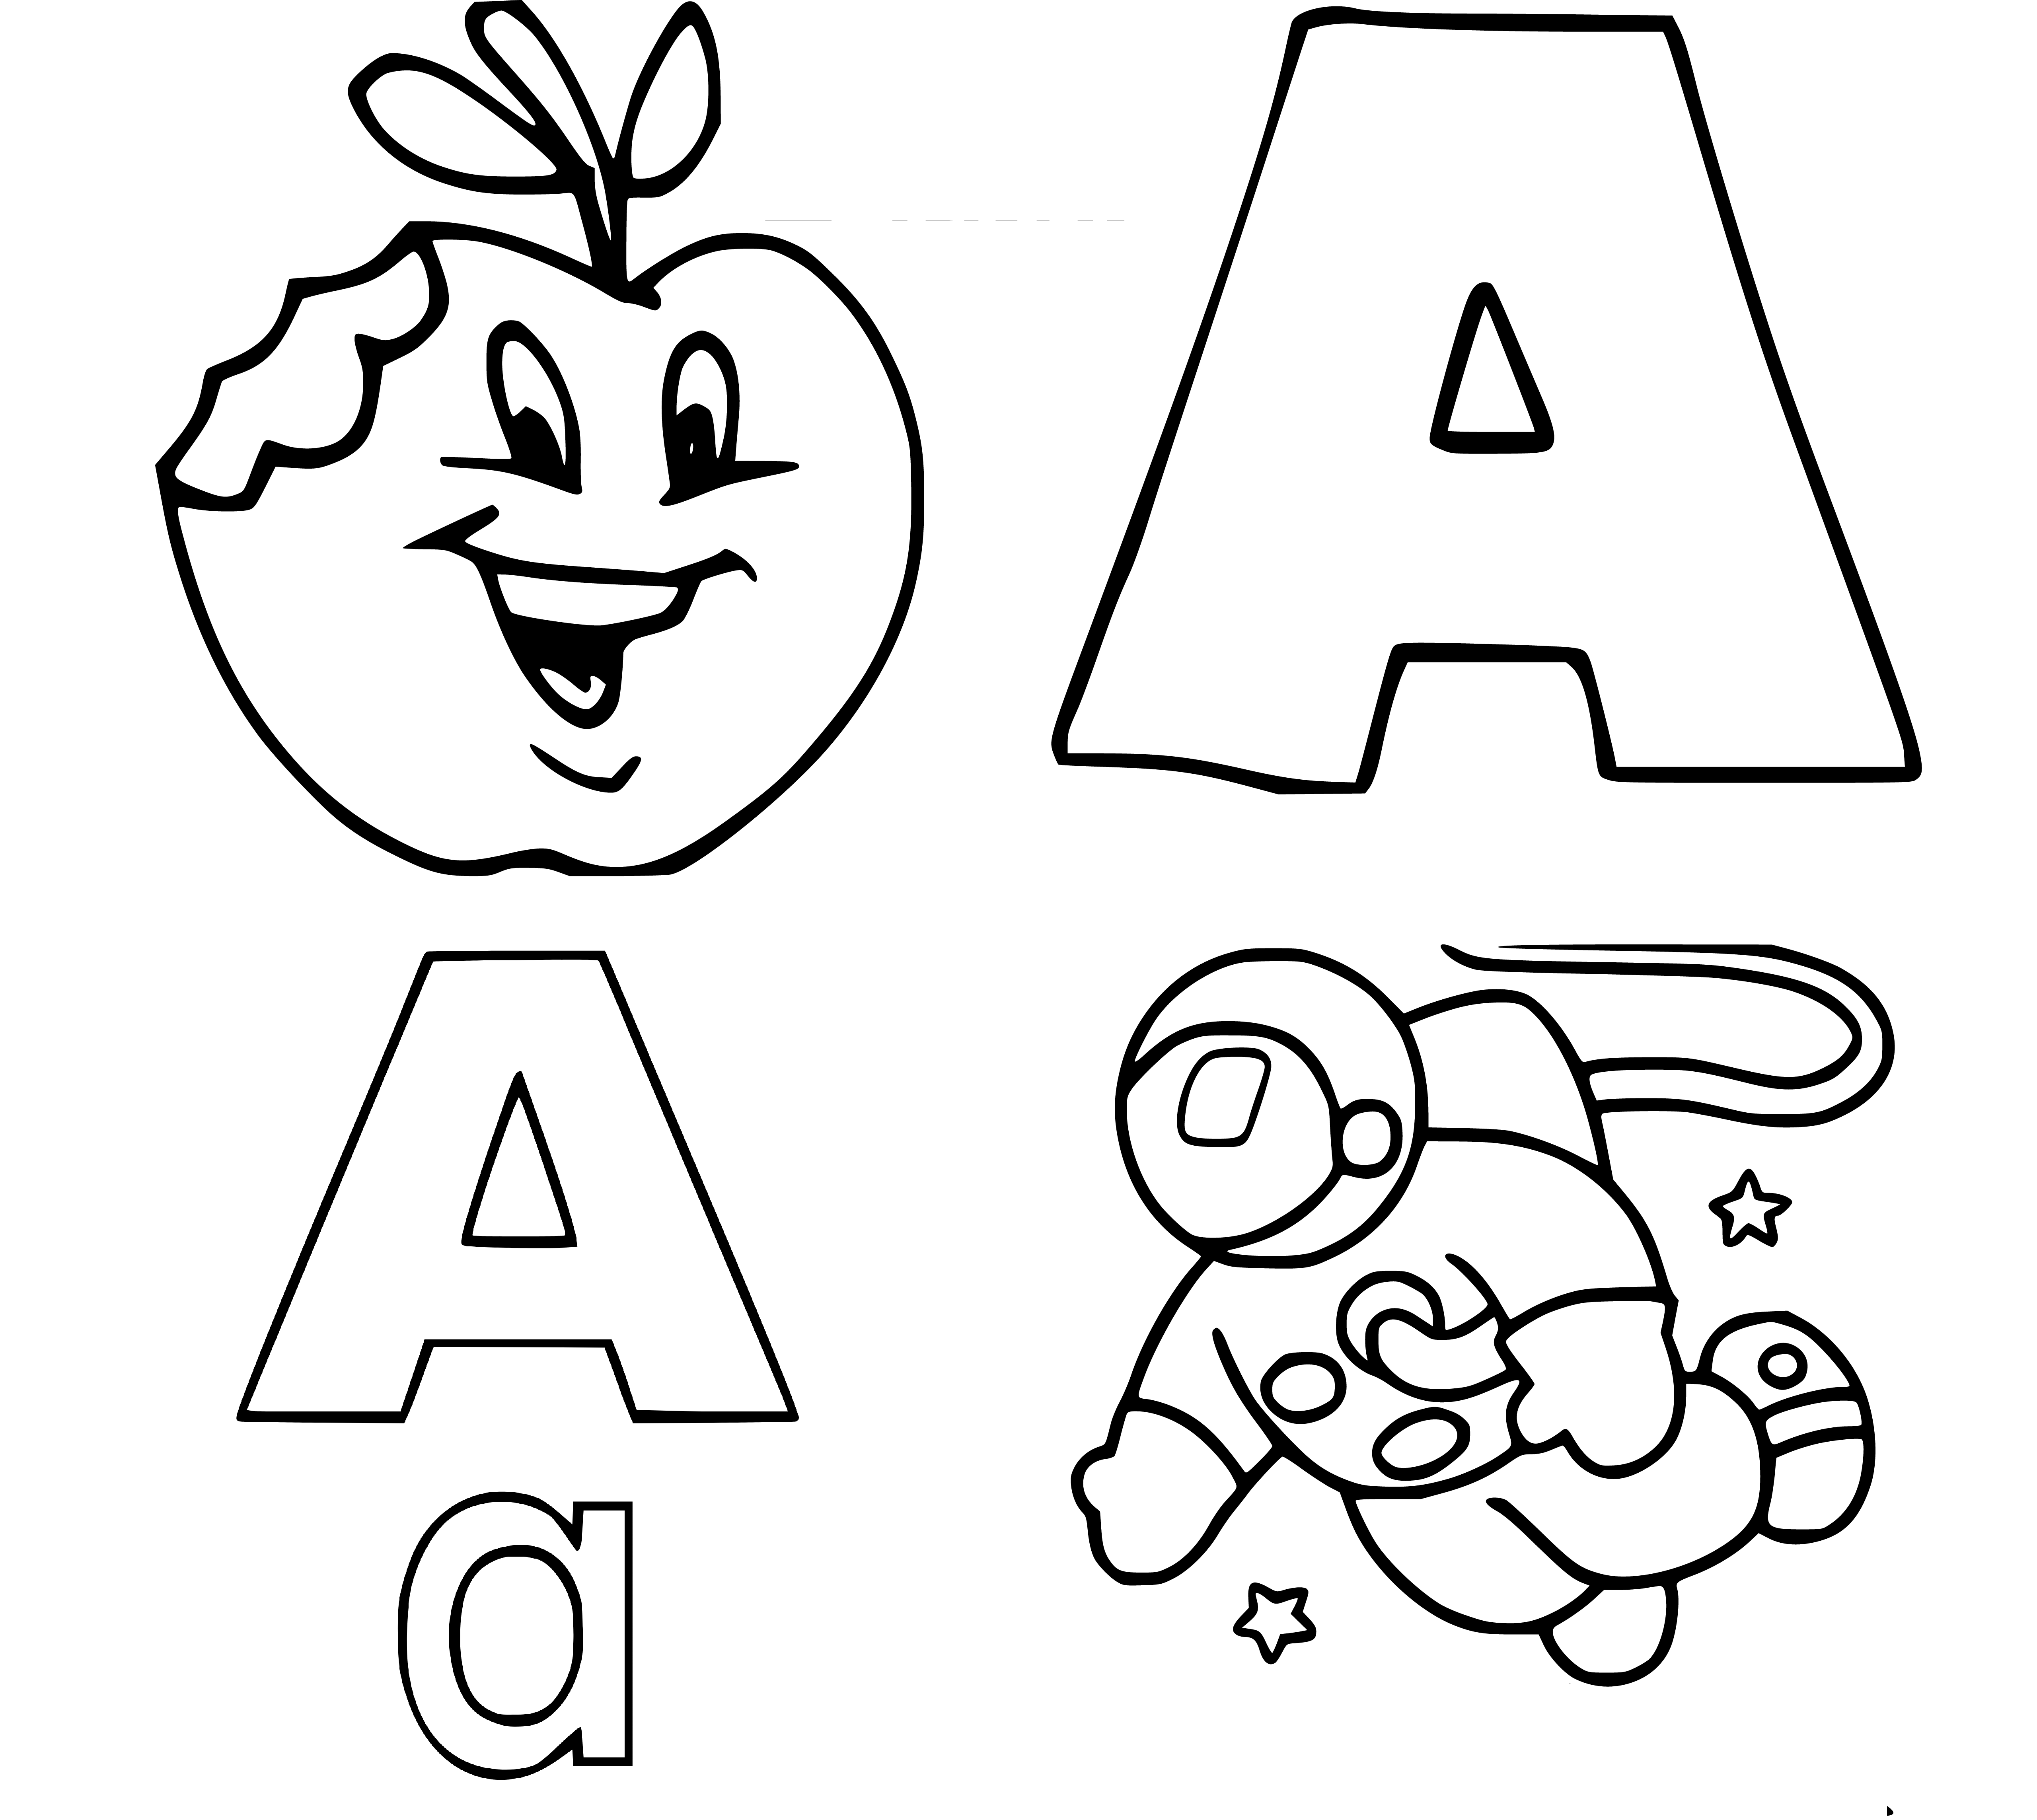 Letter A Coloring Page (A is for Astronaut) - SheetalColor.com